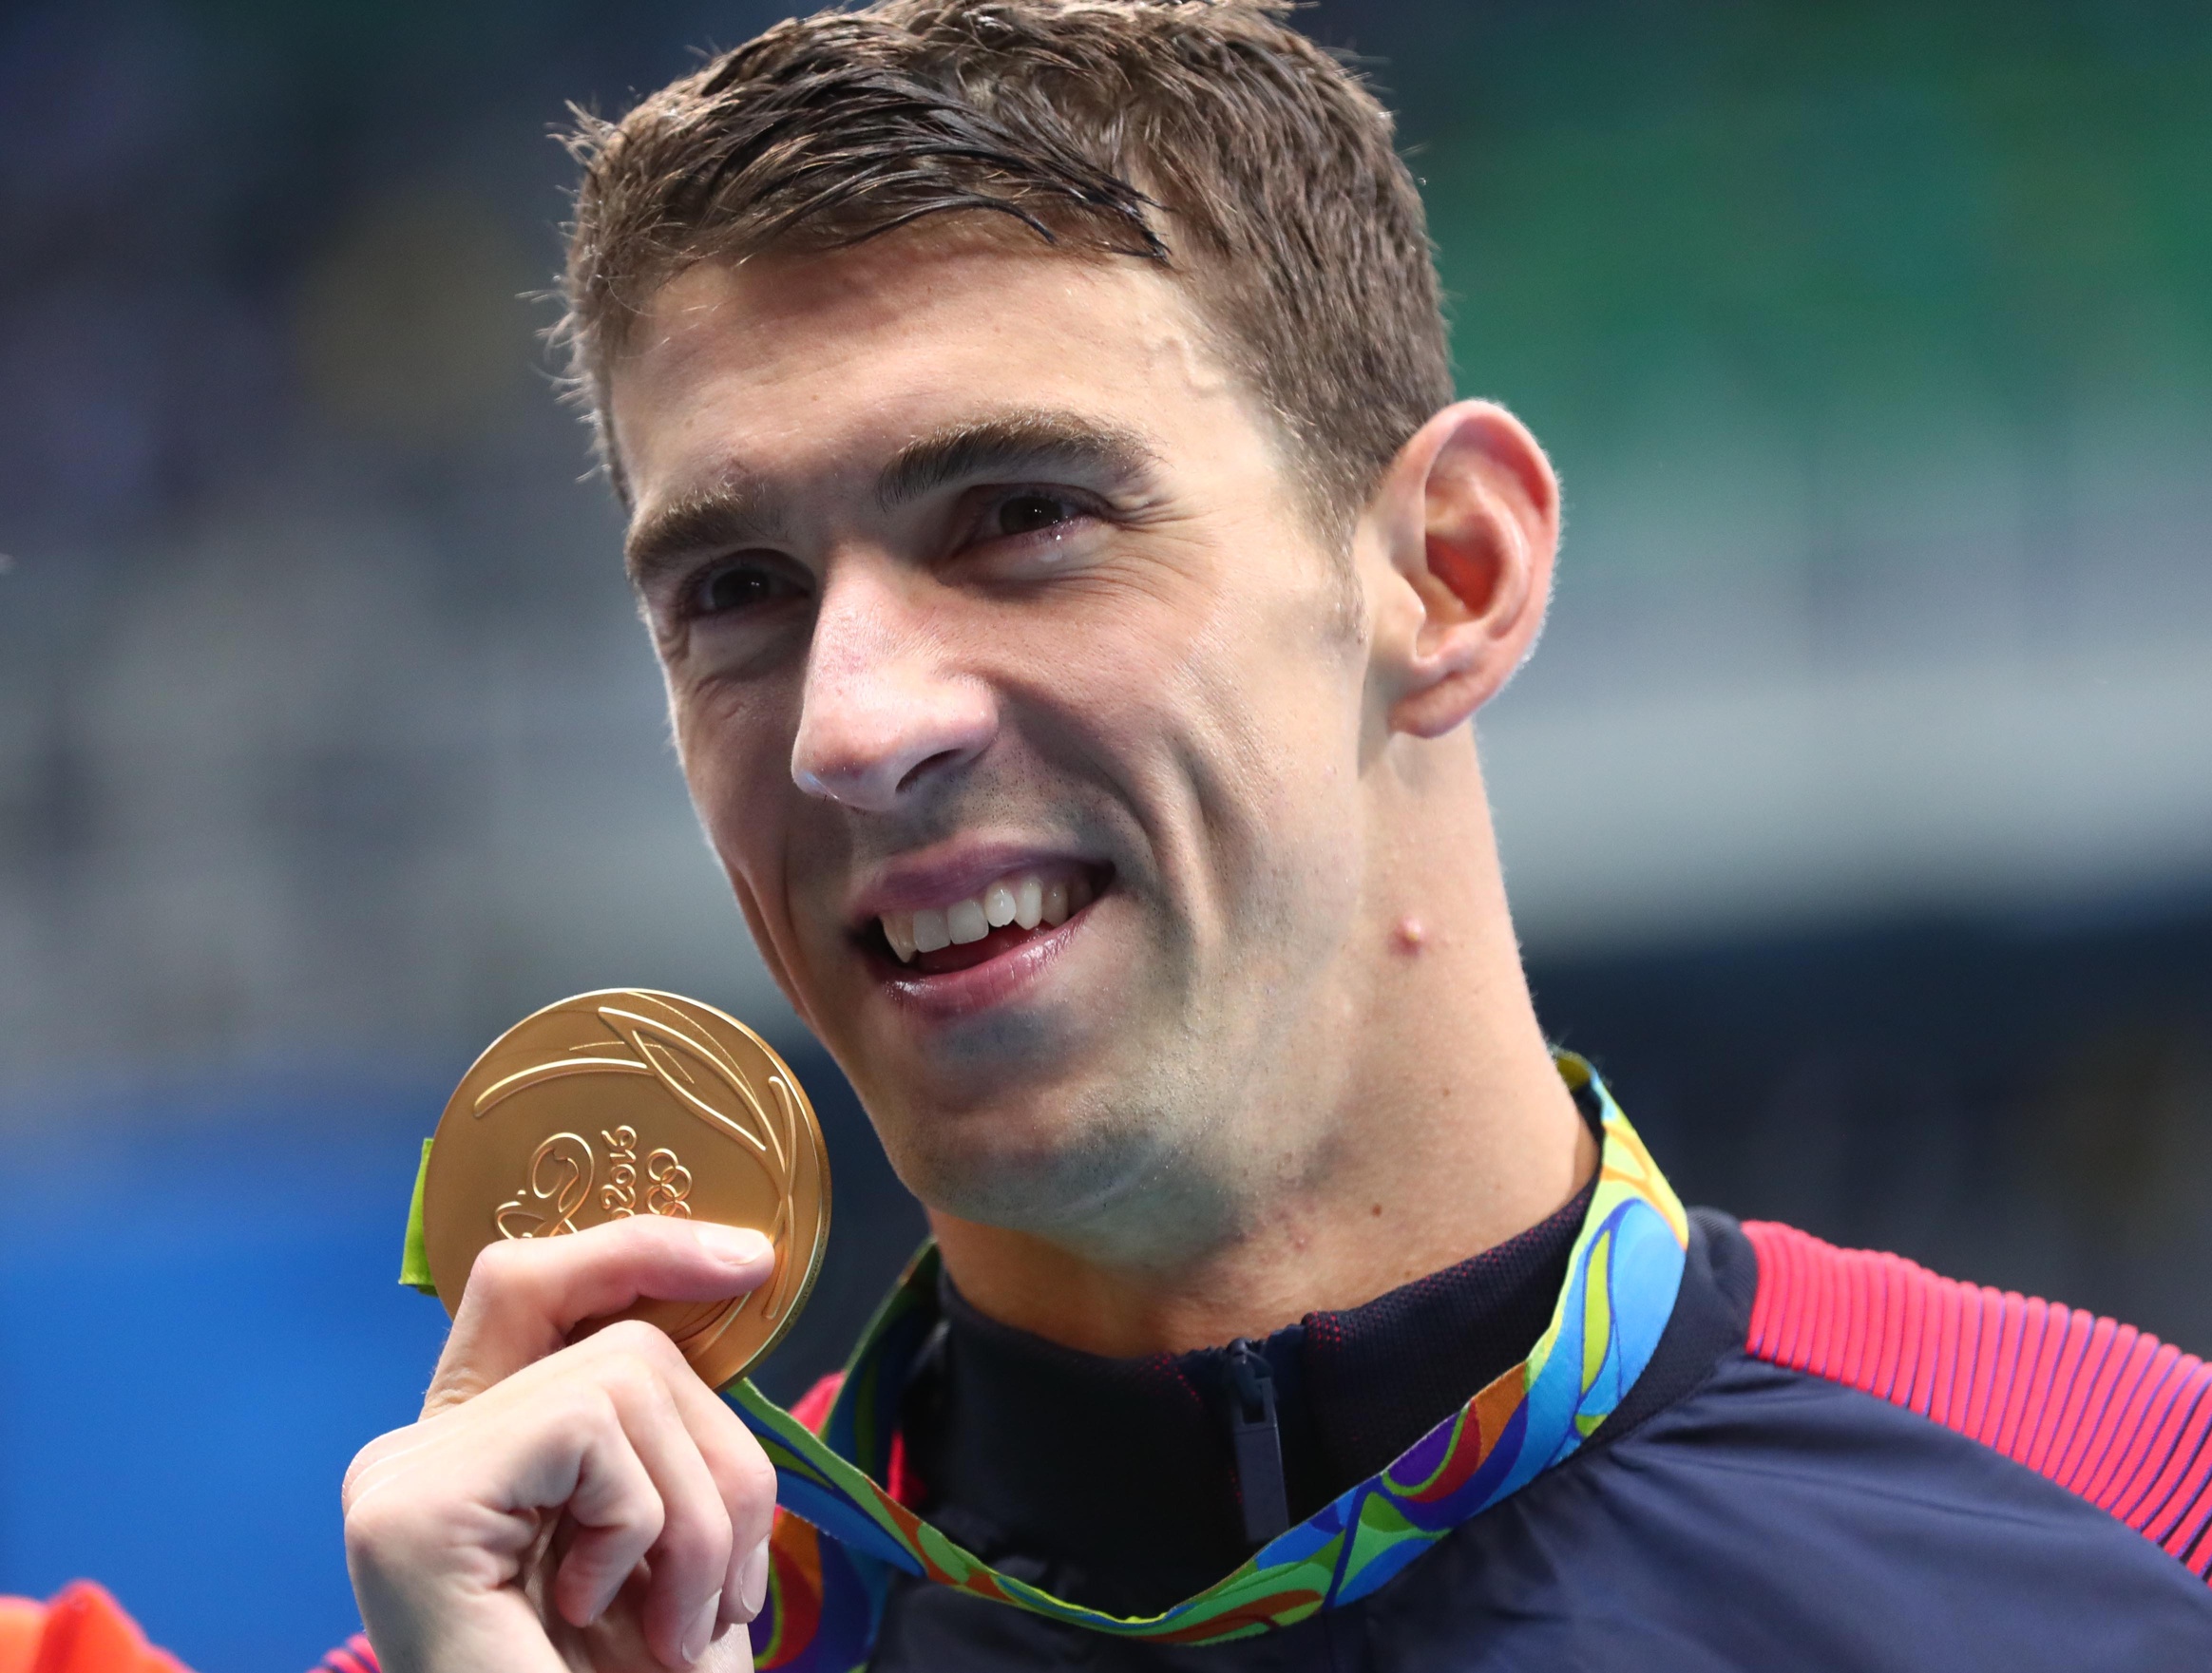 Michael Phelps USA. The most medals